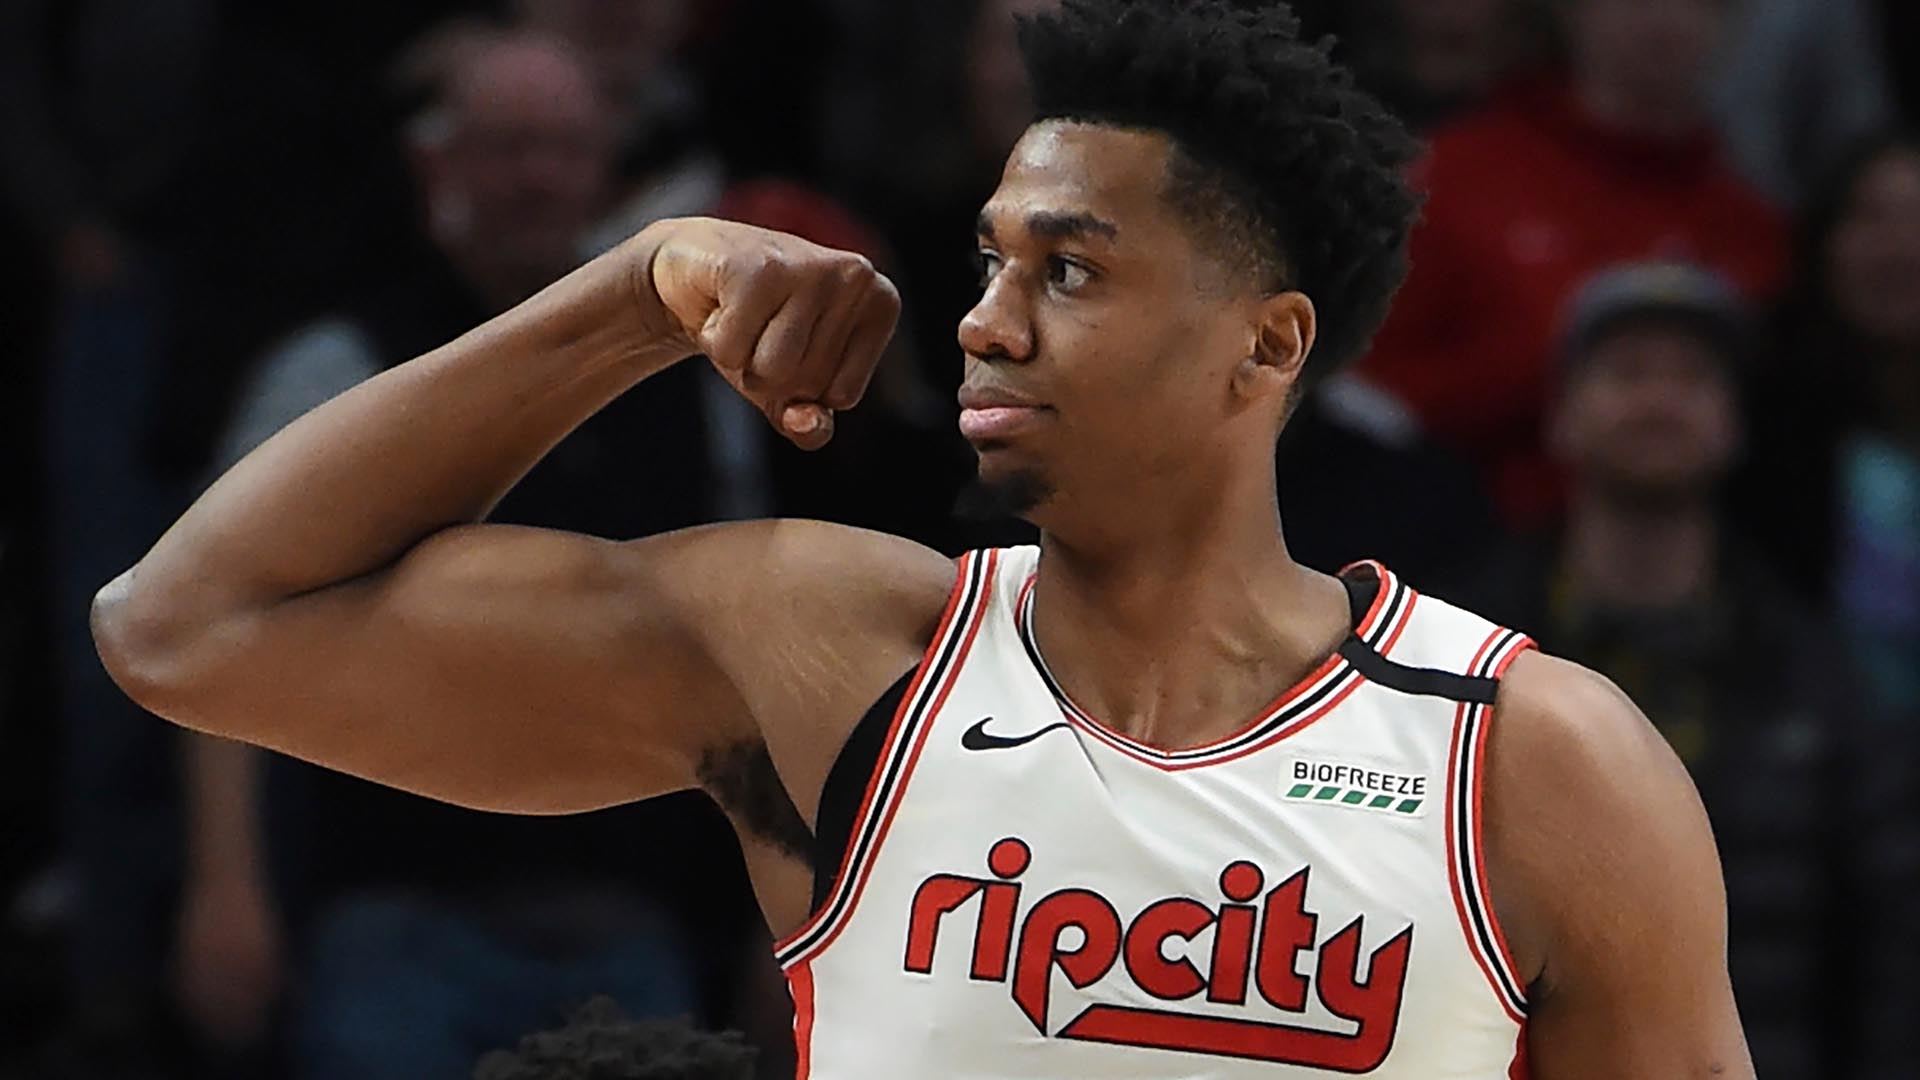 Hassan Whiteside thinks he should be the Defensive Player of the Year